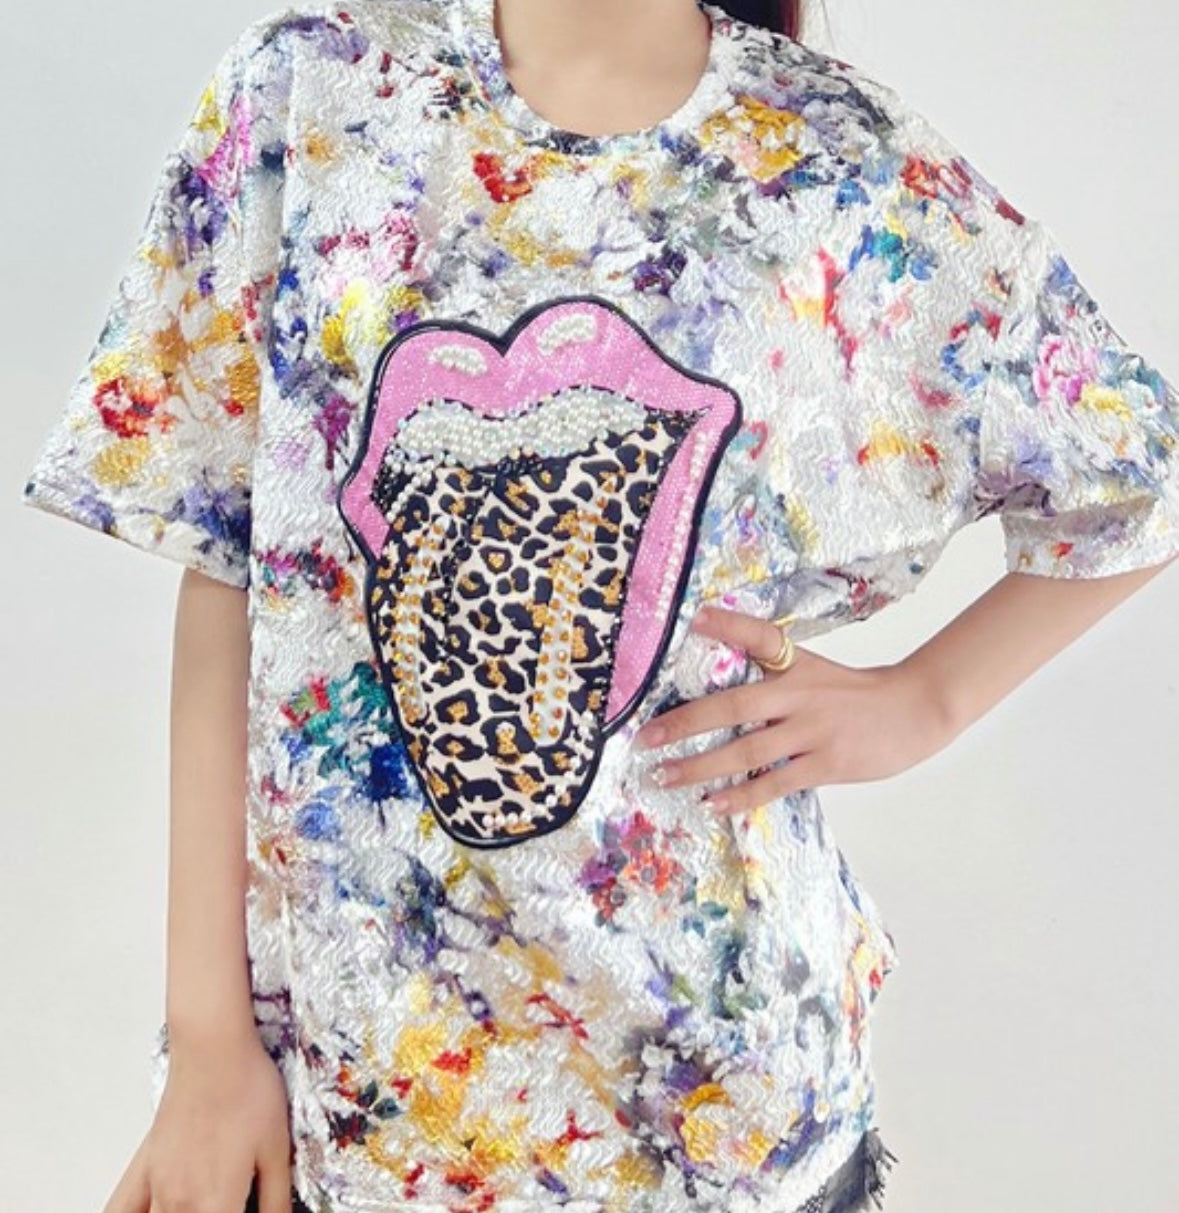 So rad graphic bling top